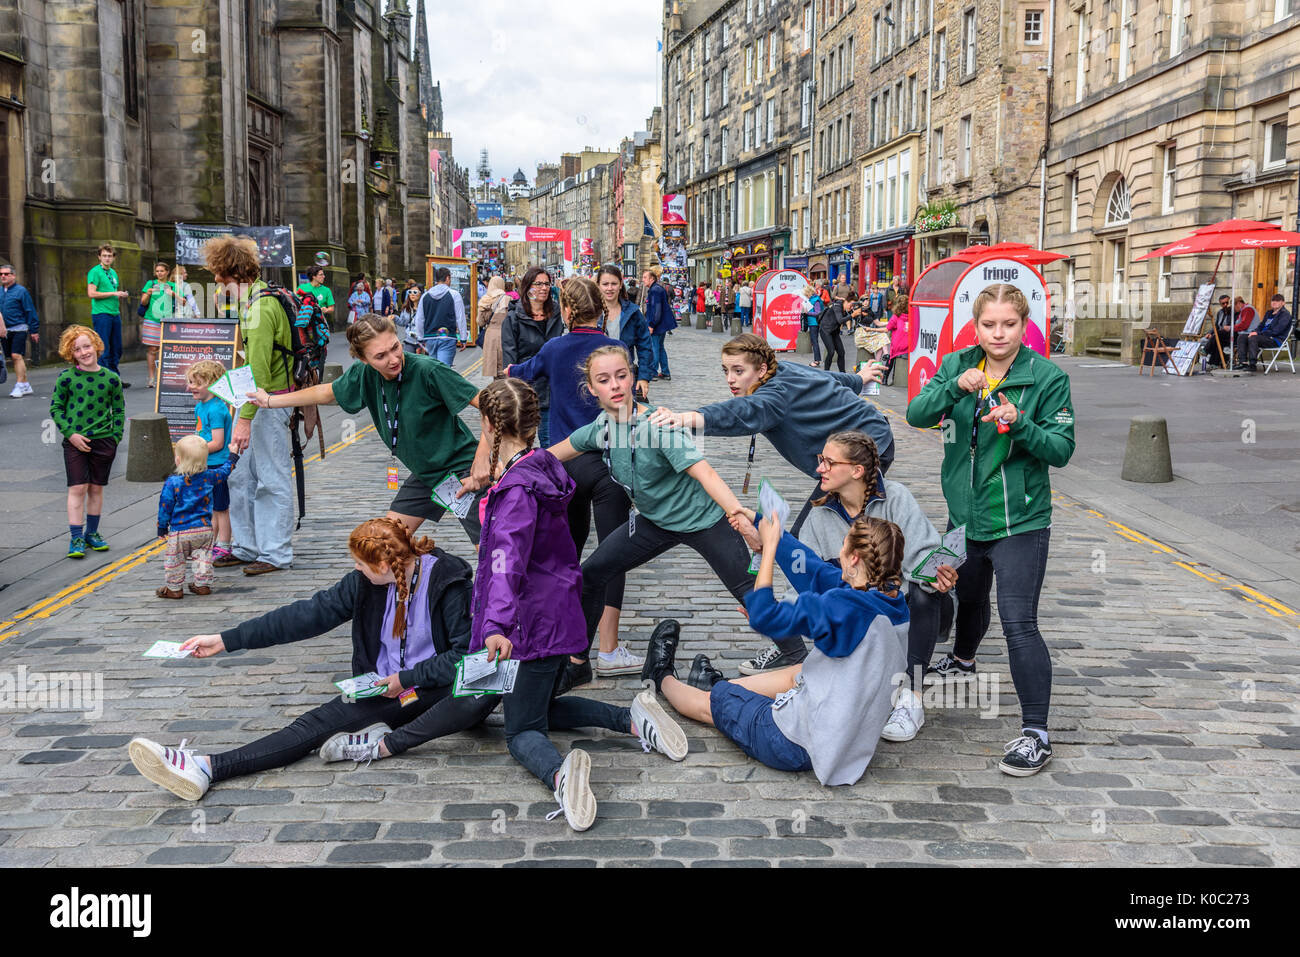 EDINBURGH, UNITED KINGDOM - AUGUST 16, 2017 - A group of young girls advertises a theatrical performance along the Royal Mile of Edinburgh during the  Stock Photo